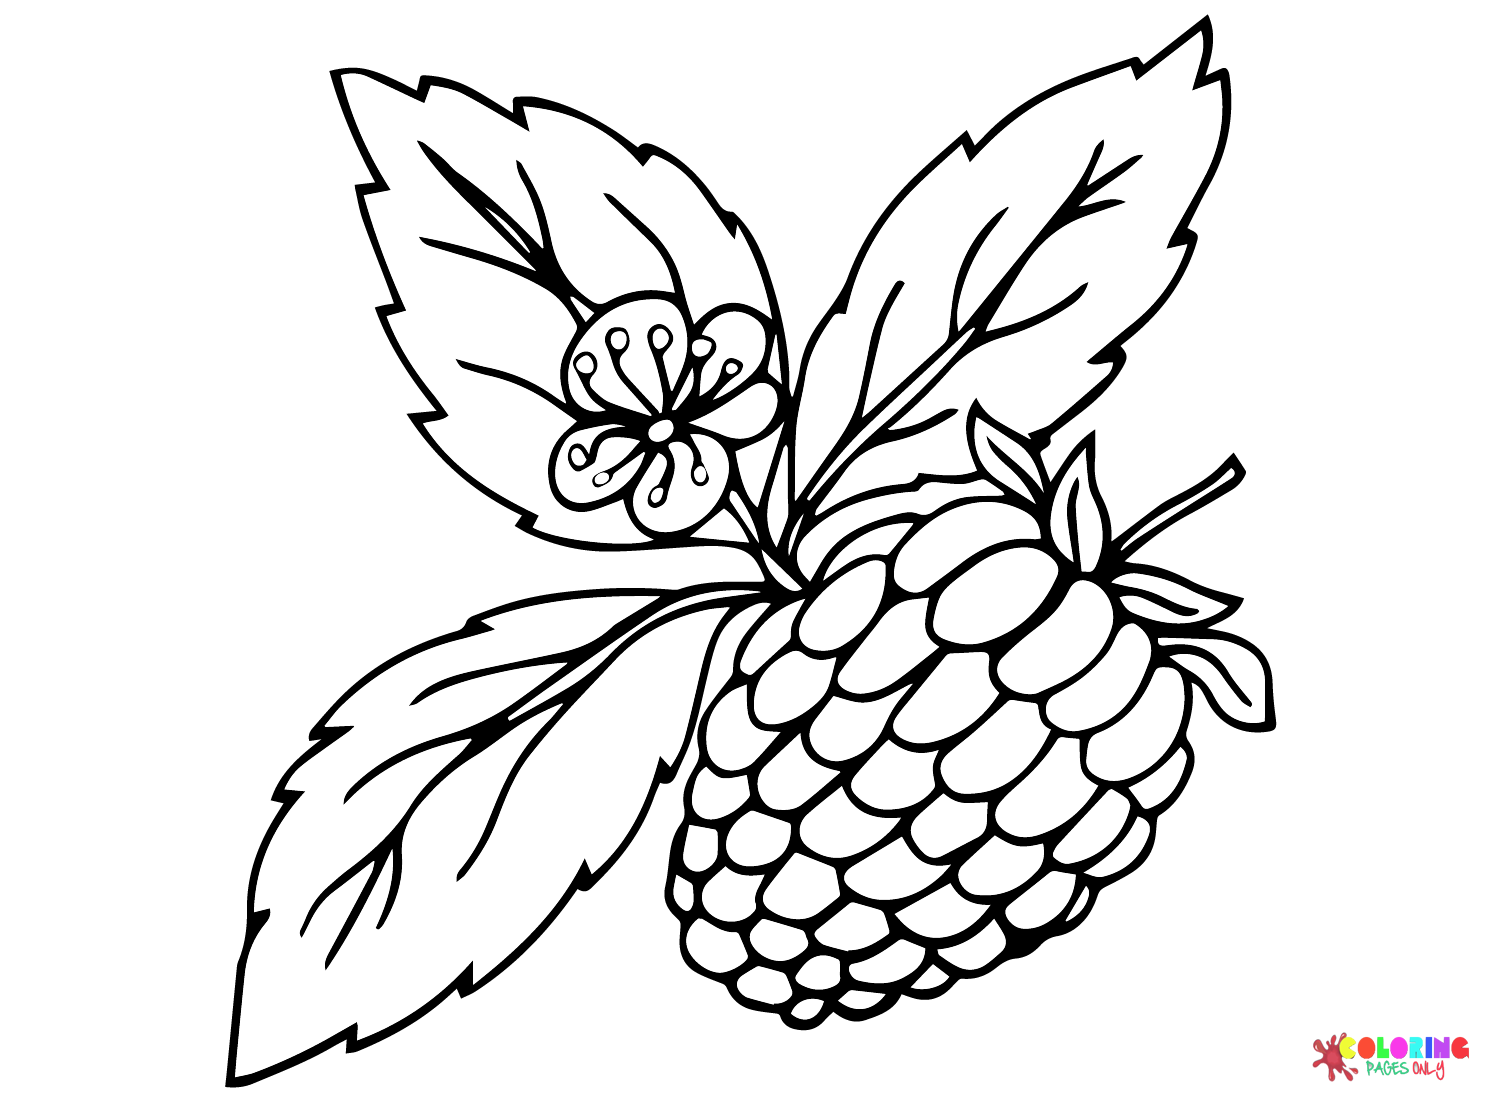 Raspberry Images Coloring Page